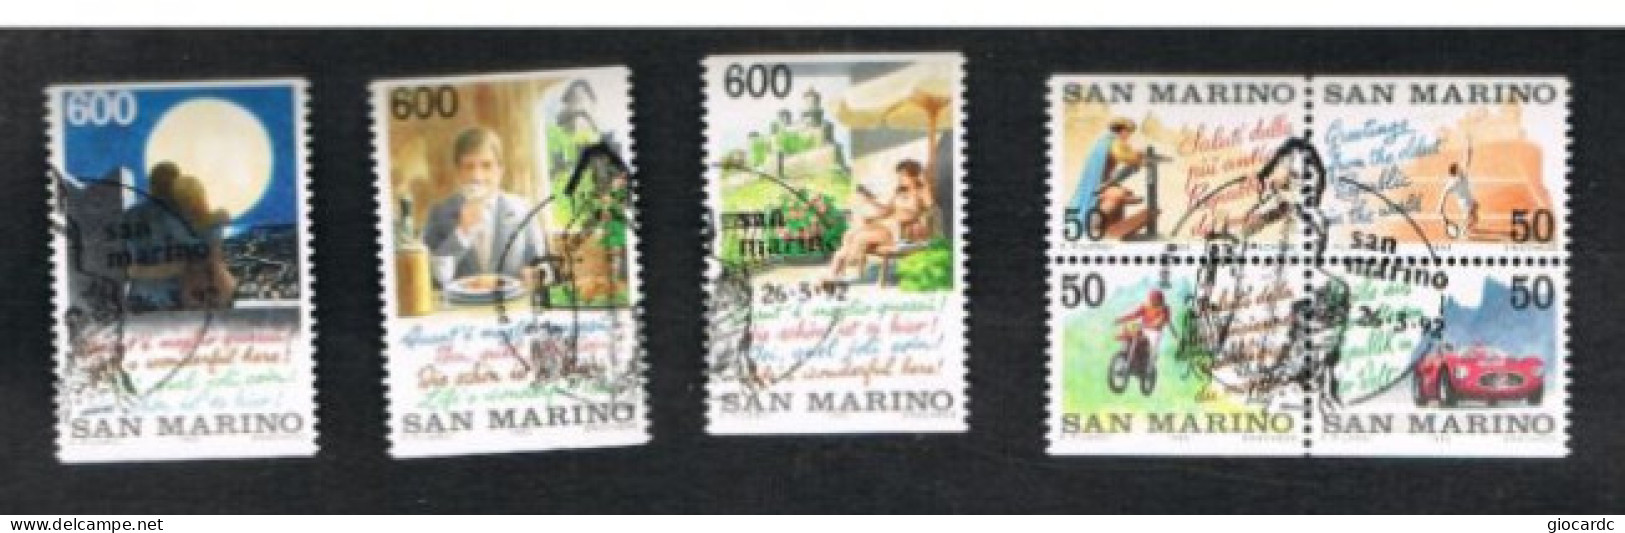 SAN MARINO - UN 1344.1350 - 1992 SITI TURISTICI DI SAN MARINO (COMPLET SET OF 7 STAMPS,4 SE-TENANT - BY BOOKLET)  - USED - Oblitérés